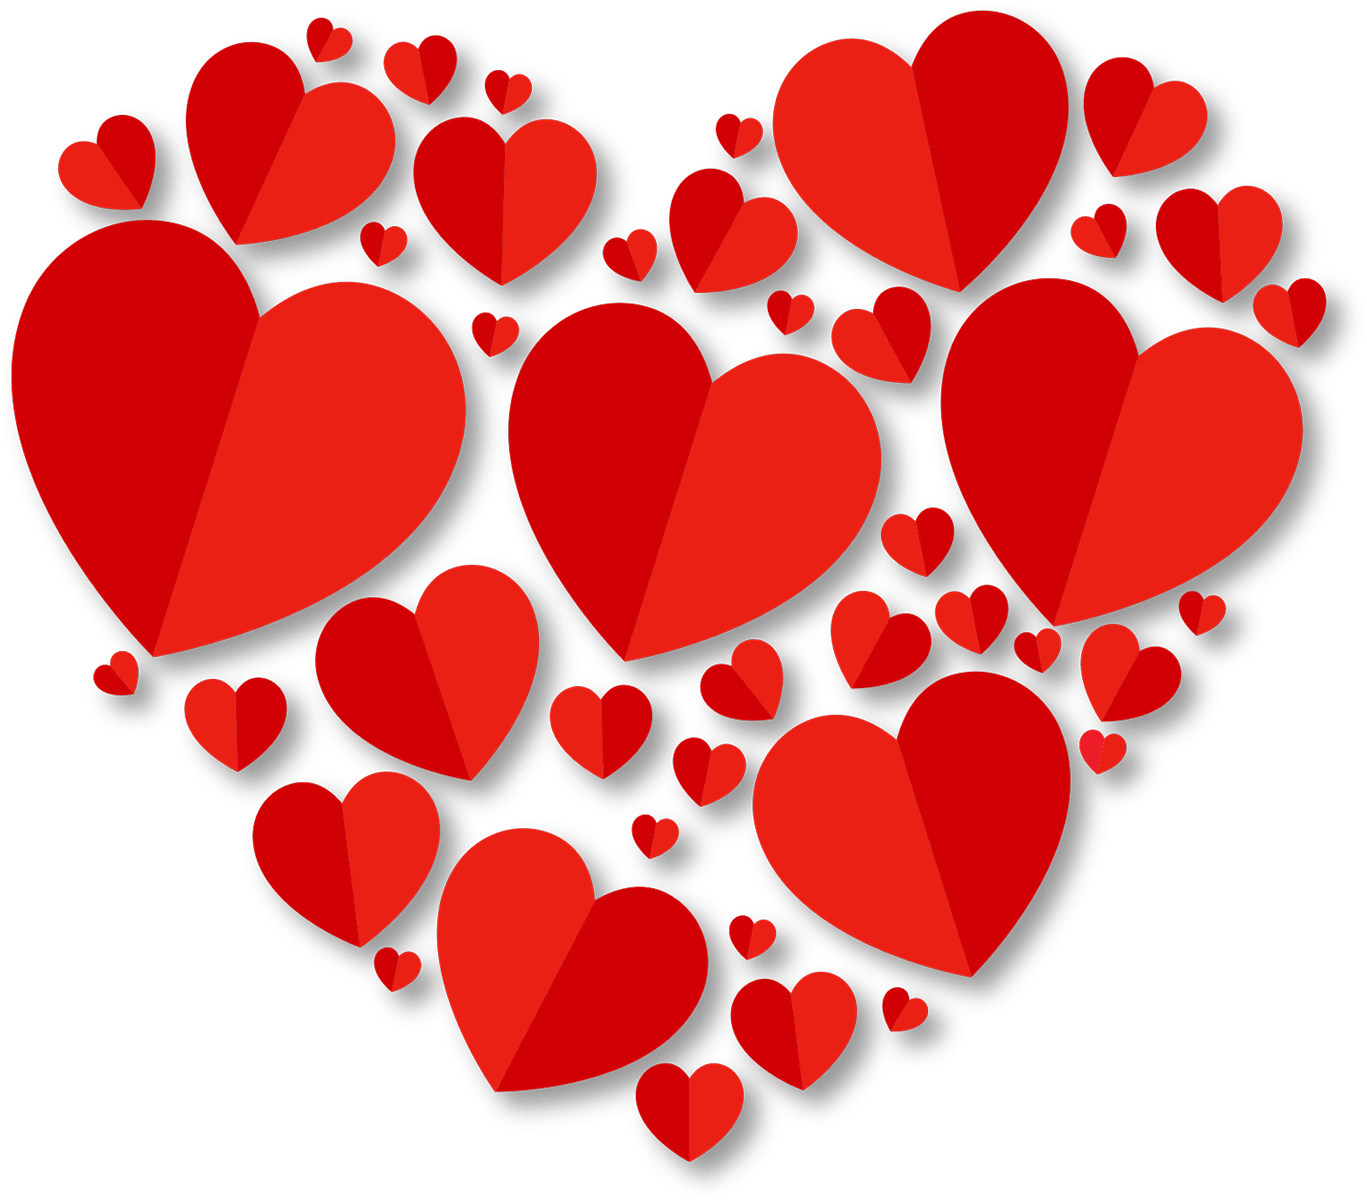 Red Hearts Love PNG Image - Cute Red Heart PNG Free Download